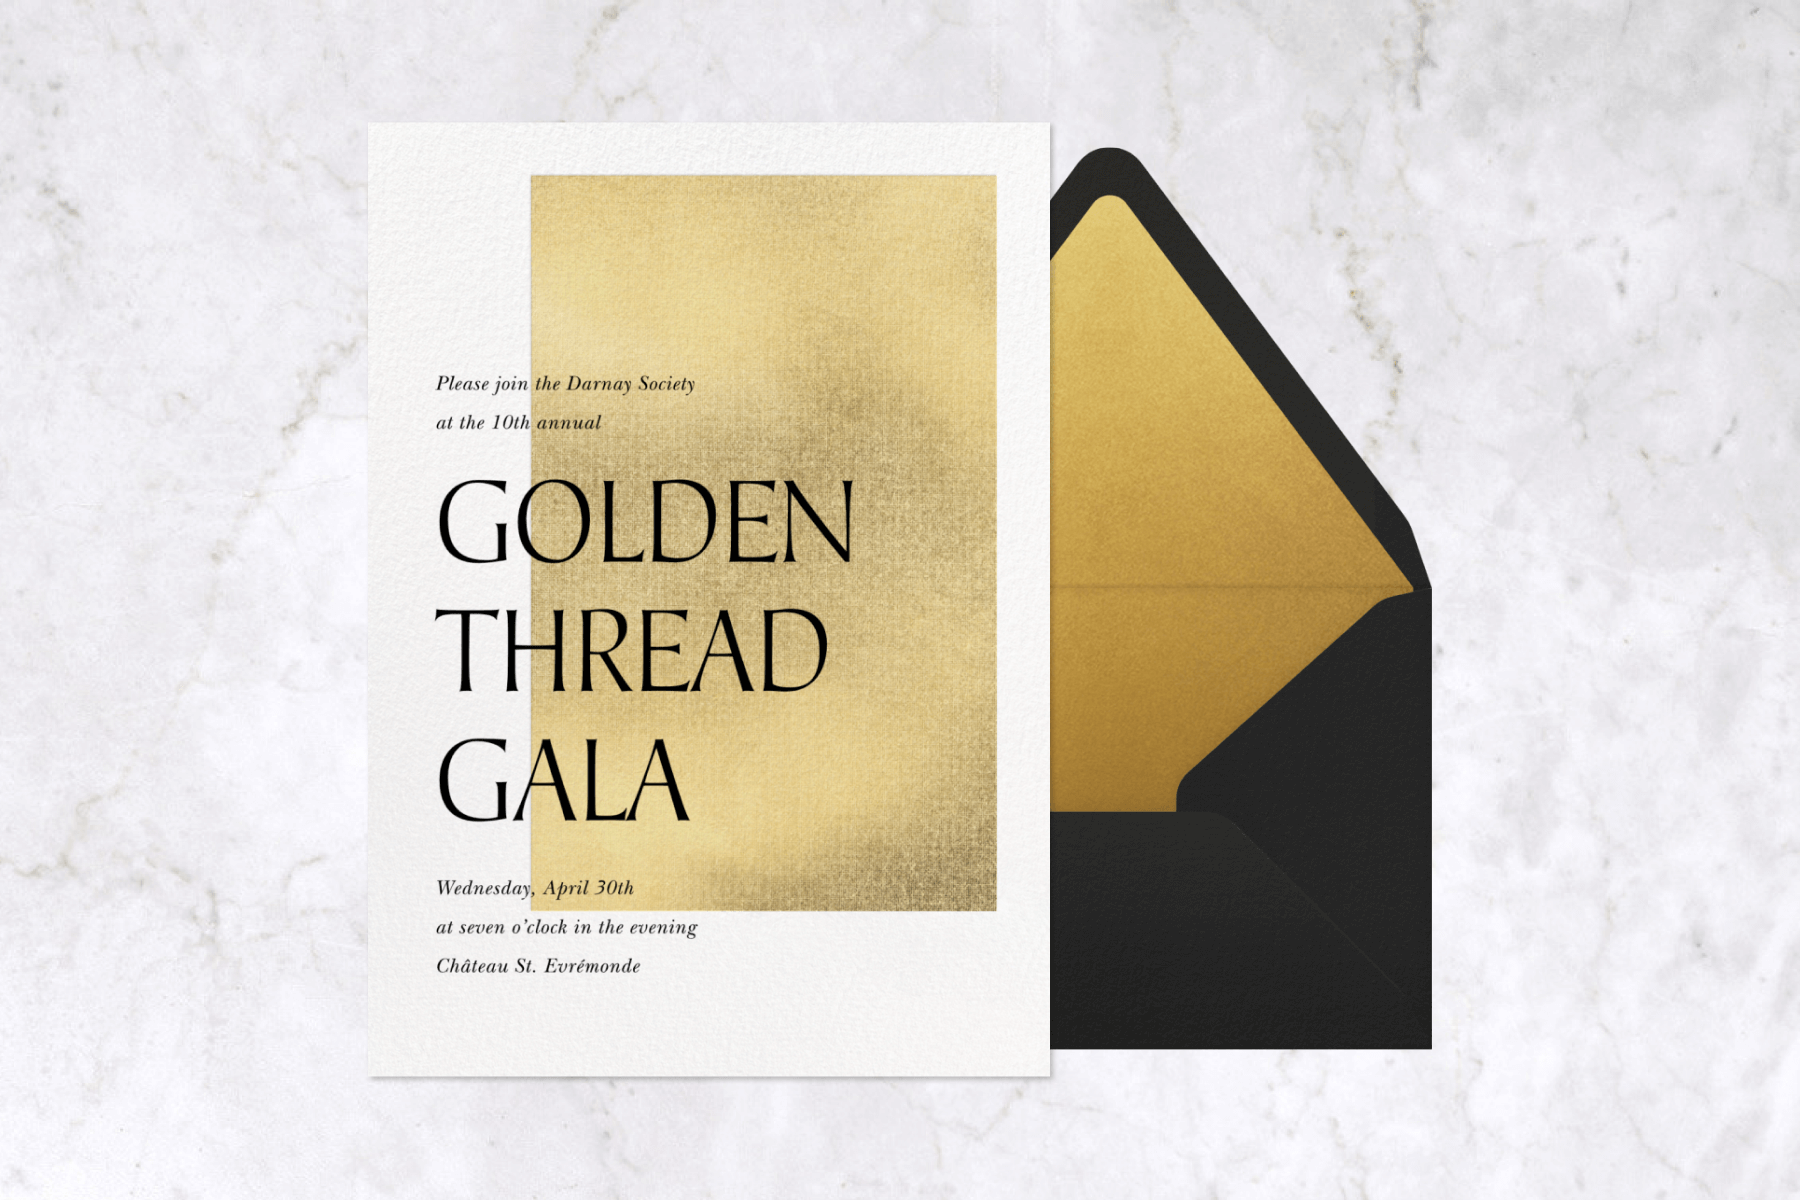 An invitation for the “Golden Thread Gala” has an off-center gold rectangle behind the text, and a black envelope with gold liner.